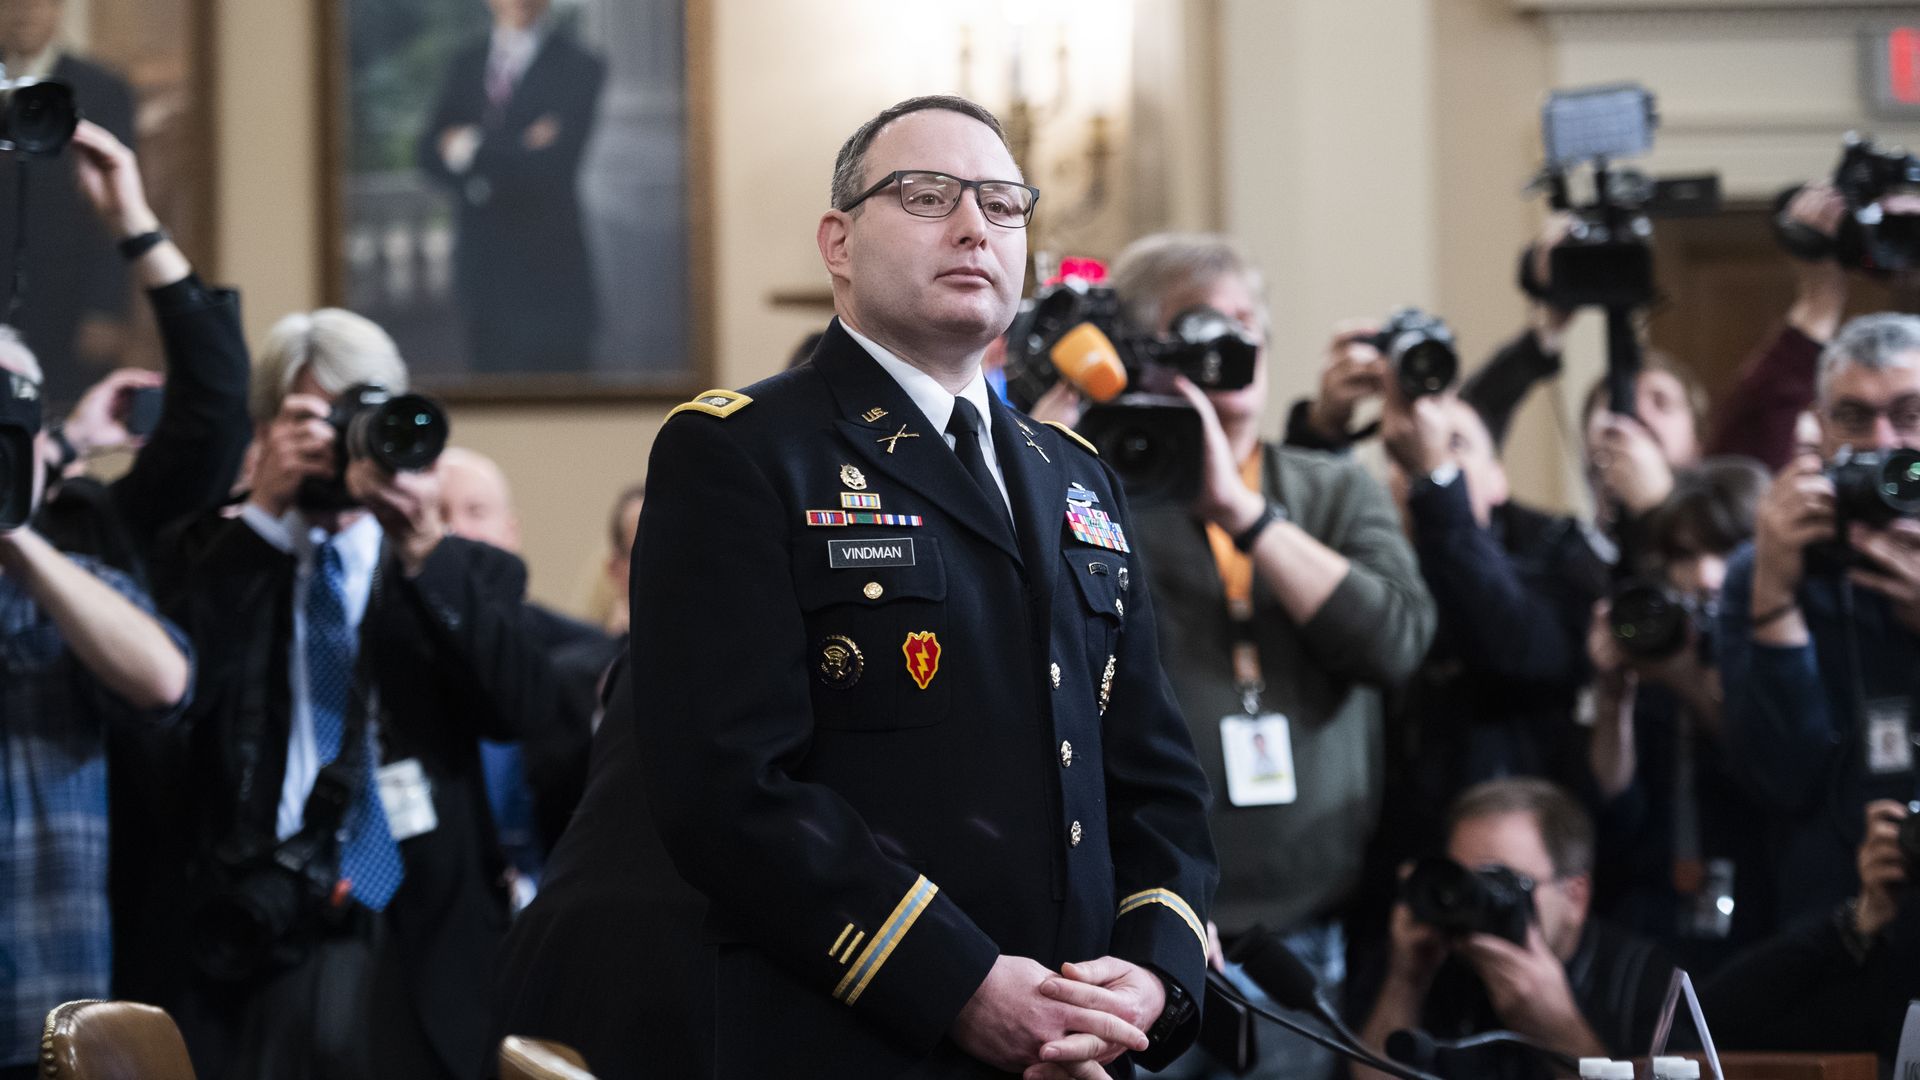  Lt. Col. Alexander Vindman, director of European affairs at the National Security Council, at the impeachment hearing on the impeachment inquiry of President Trump November 19